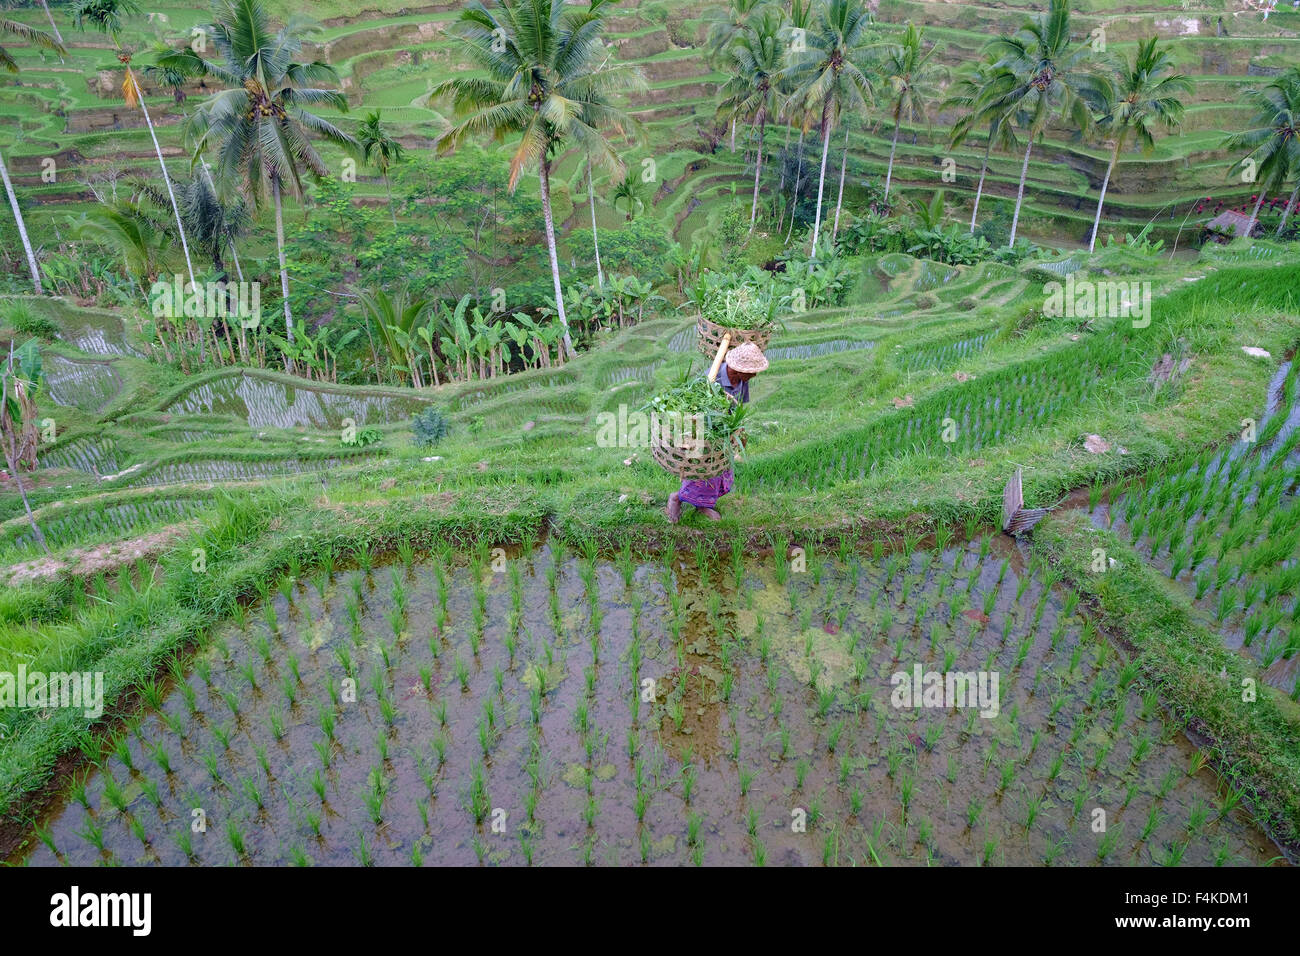 Unidentified traditional Balinese farmer crossing the paddy field in Tegallalang, Ubud, Bali. Stock Photo